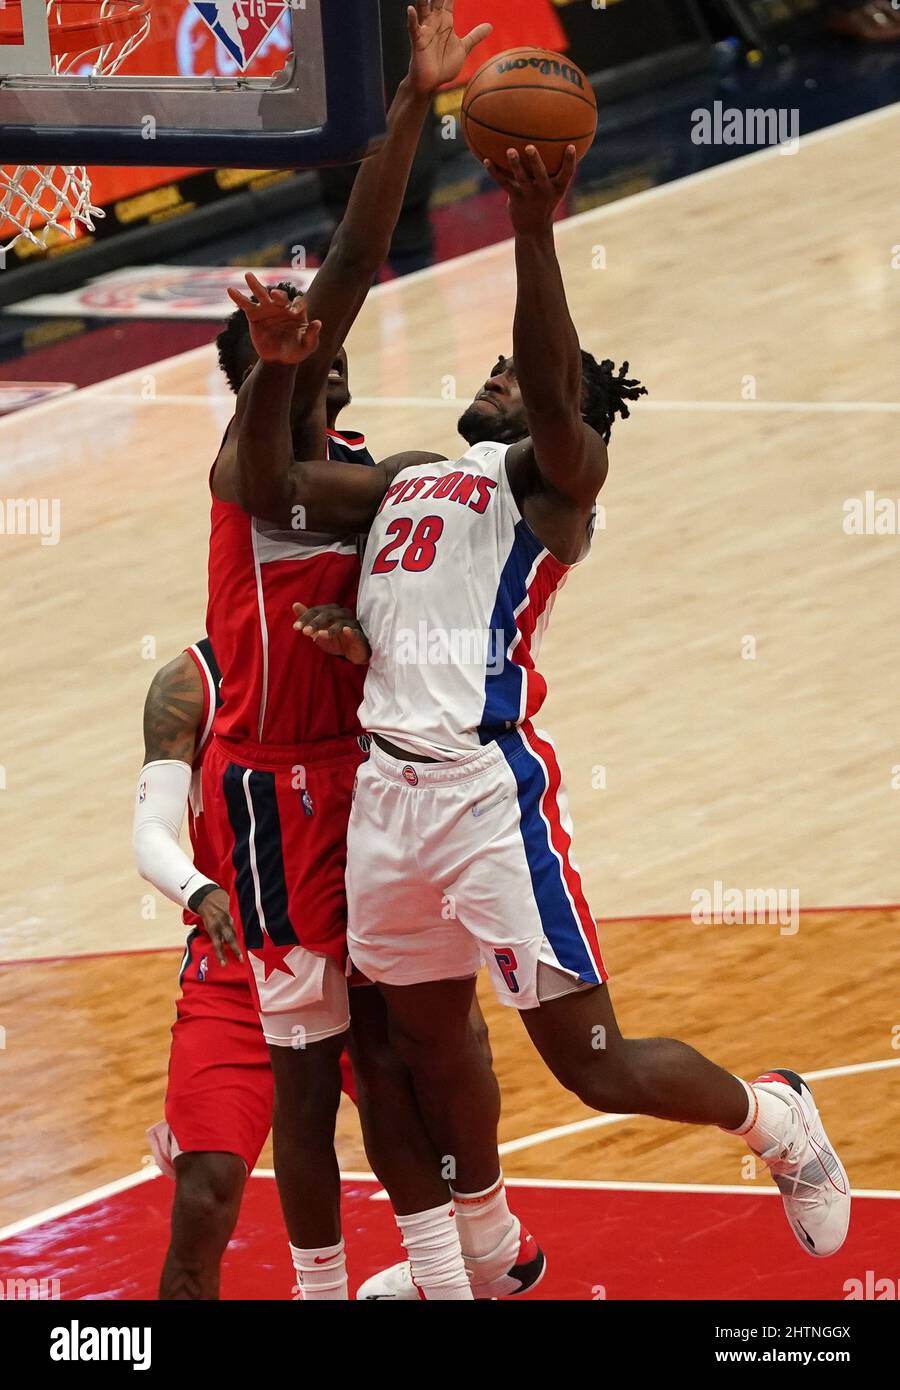 Washington, USA. 01st Mar, 2022. WASHINGTON, DC - MARCH 01: Detroit Pistons center Isaiah Stewart (28) up for a basket during a NBA game between the Washington Wizards and the Detroit Pistons, on March 01, 2022, at Capital One Arena, in Washington, DC. (Photo by Tony Quinn/SipaUSA) Credit: Sipa USA/Alamy Live News Stock Photo